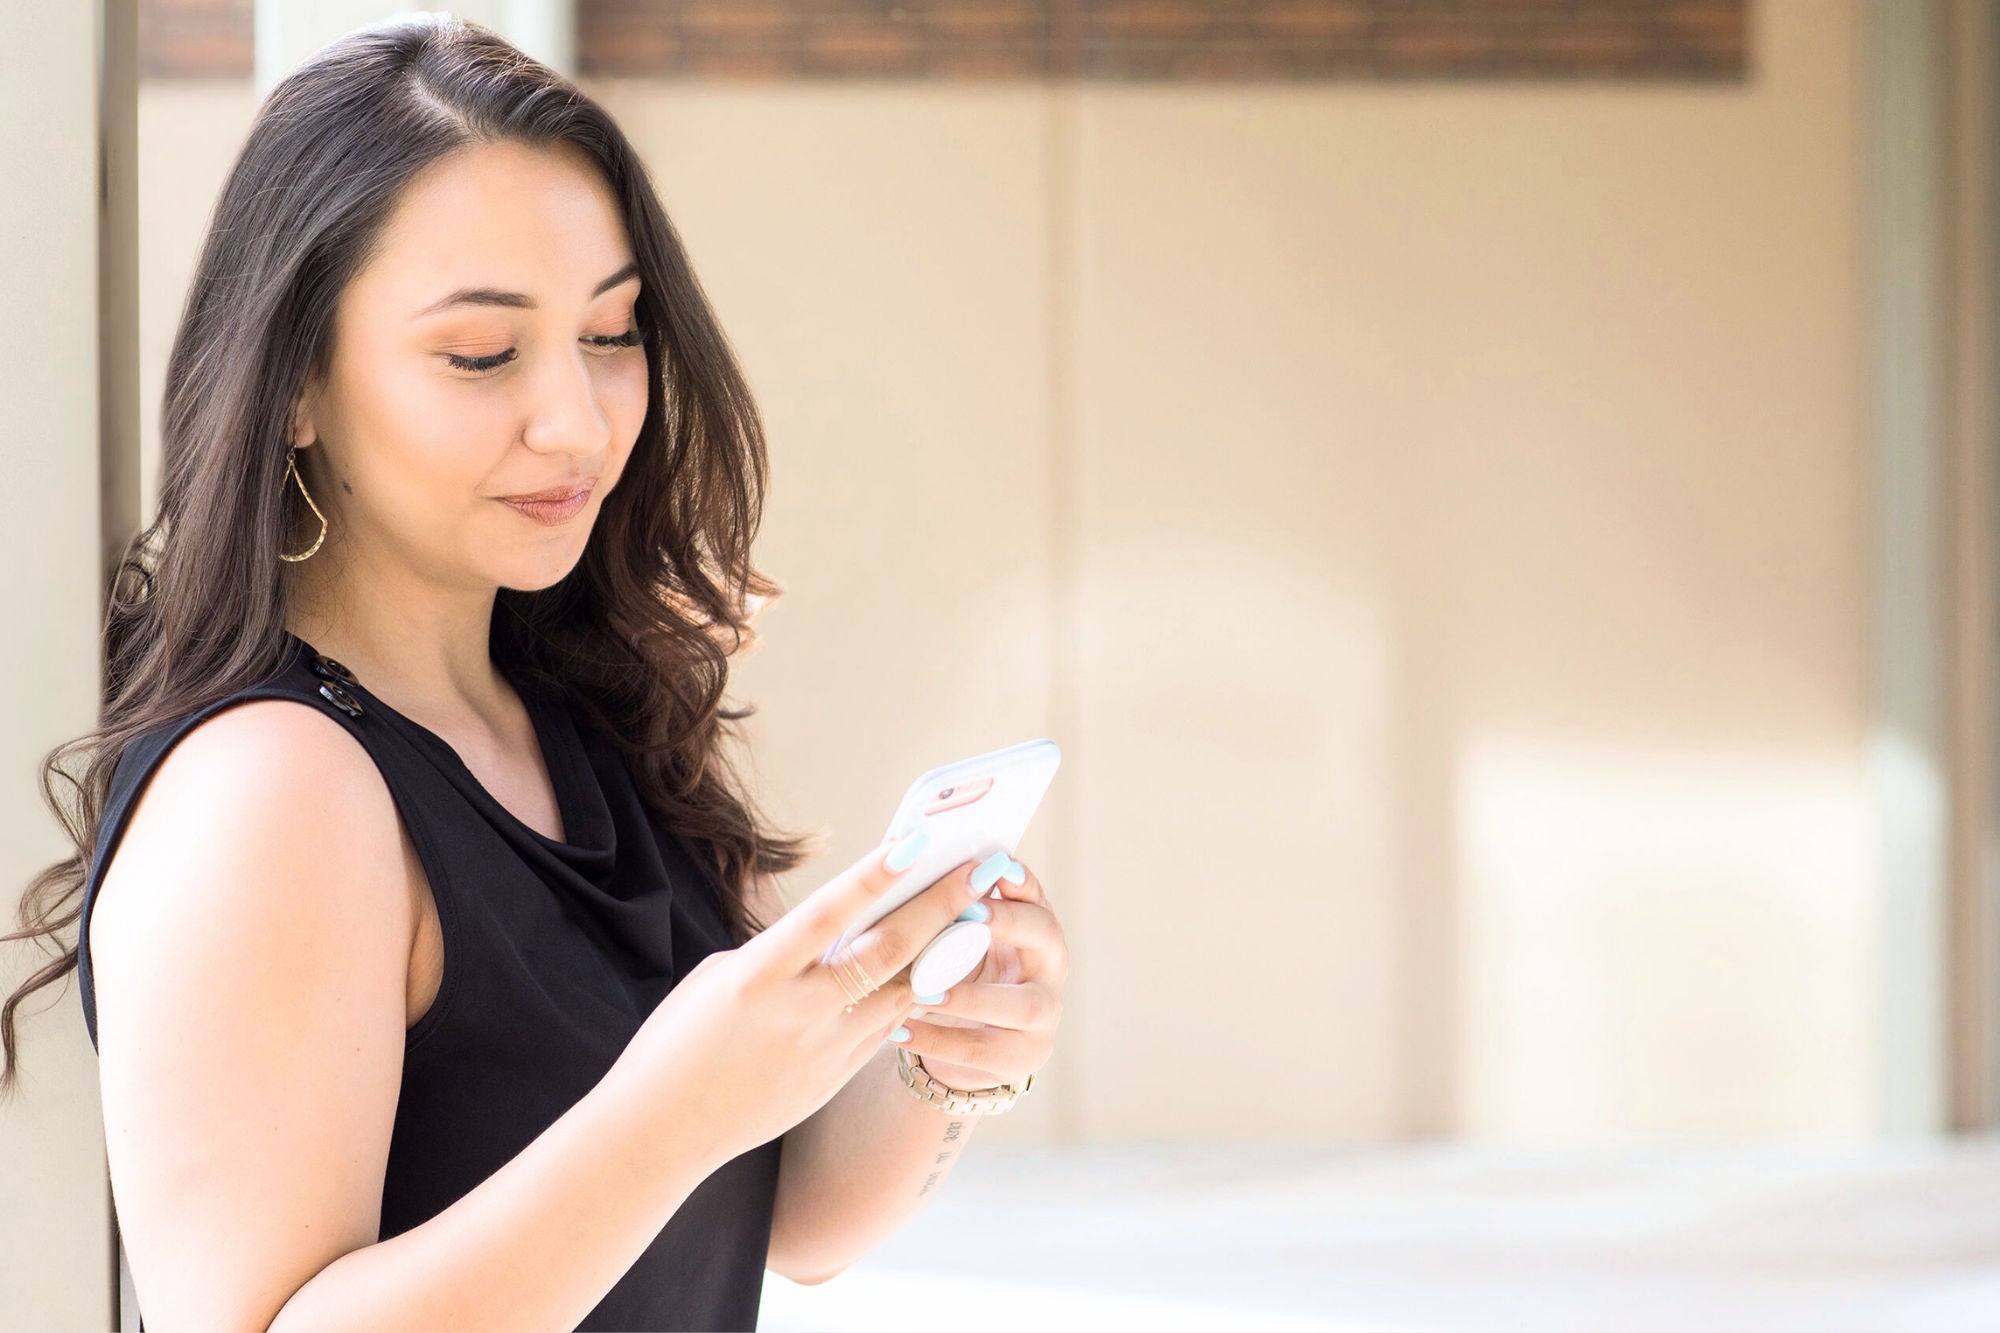 young hispanic woman with lash extensions looking at cell phone